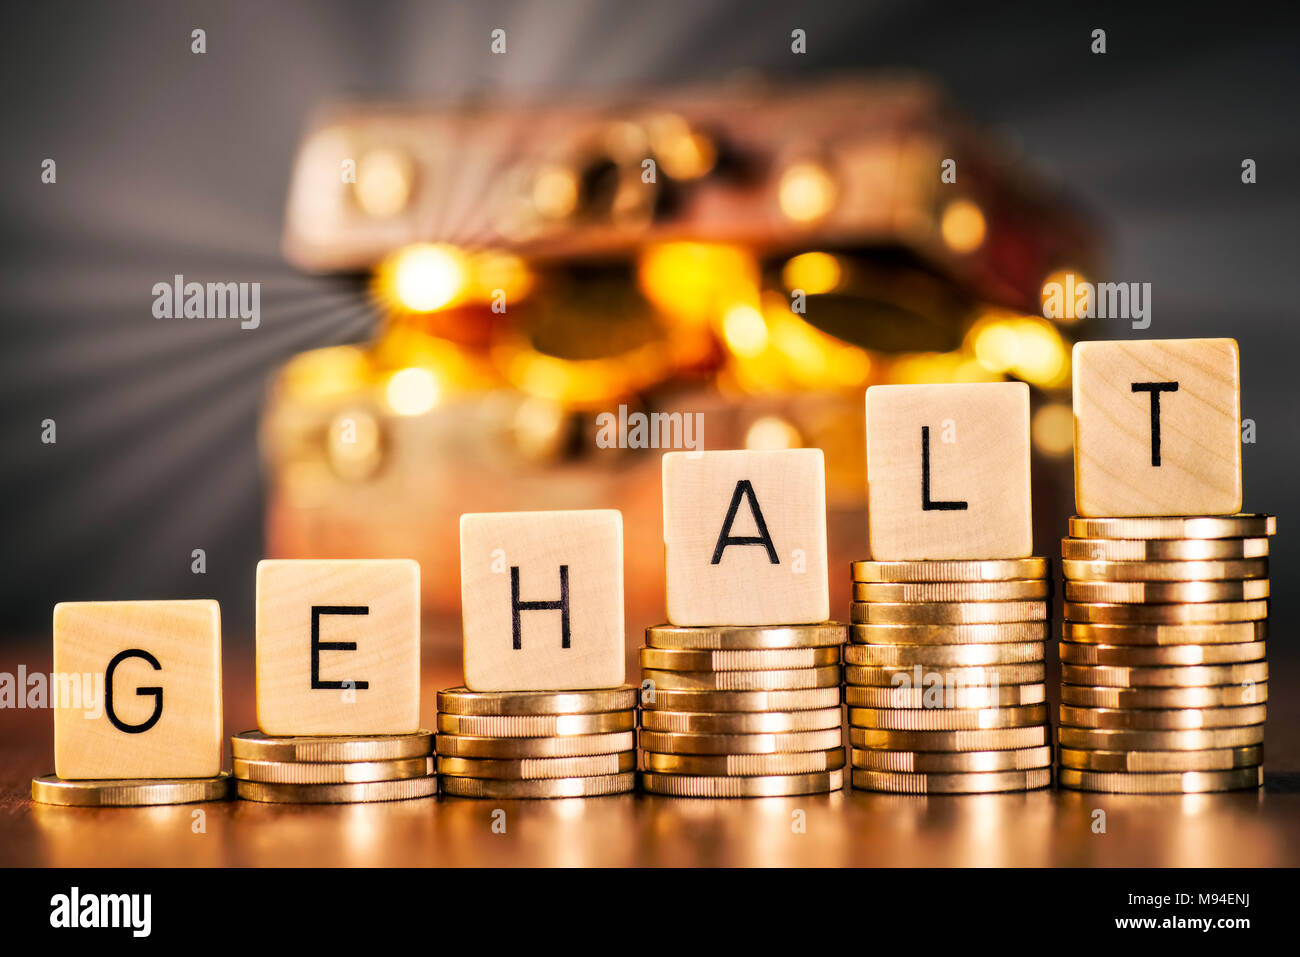 The german word 'Gehalt' for Salary on rising stacks with coins in front of a chest with money in the background. Stock Photo